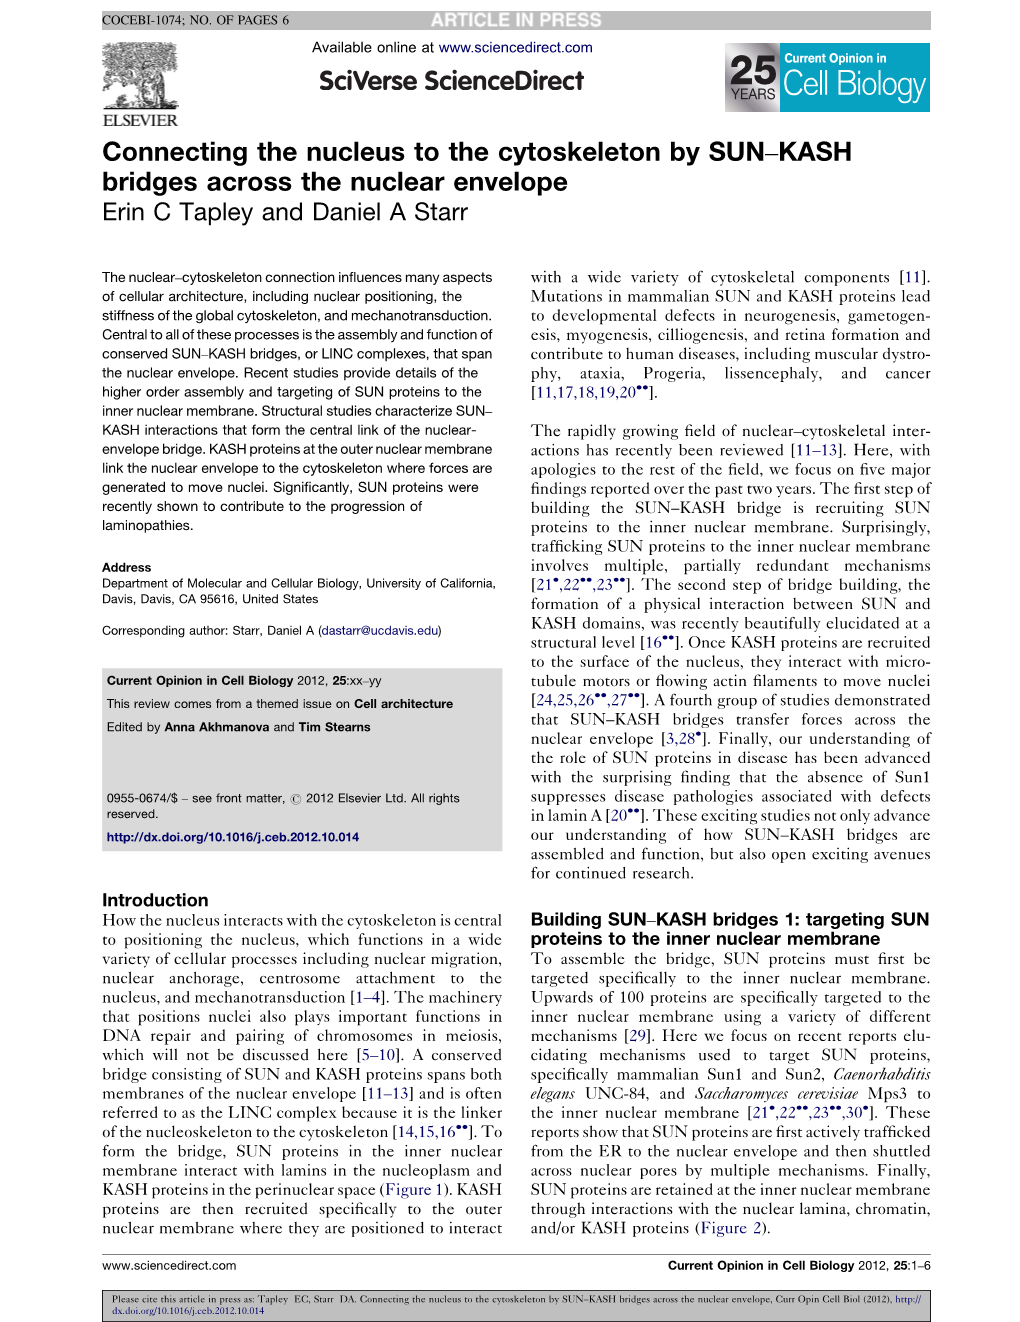 Connecting the Nucleus to the Cytoskeleton by SUN–KASH